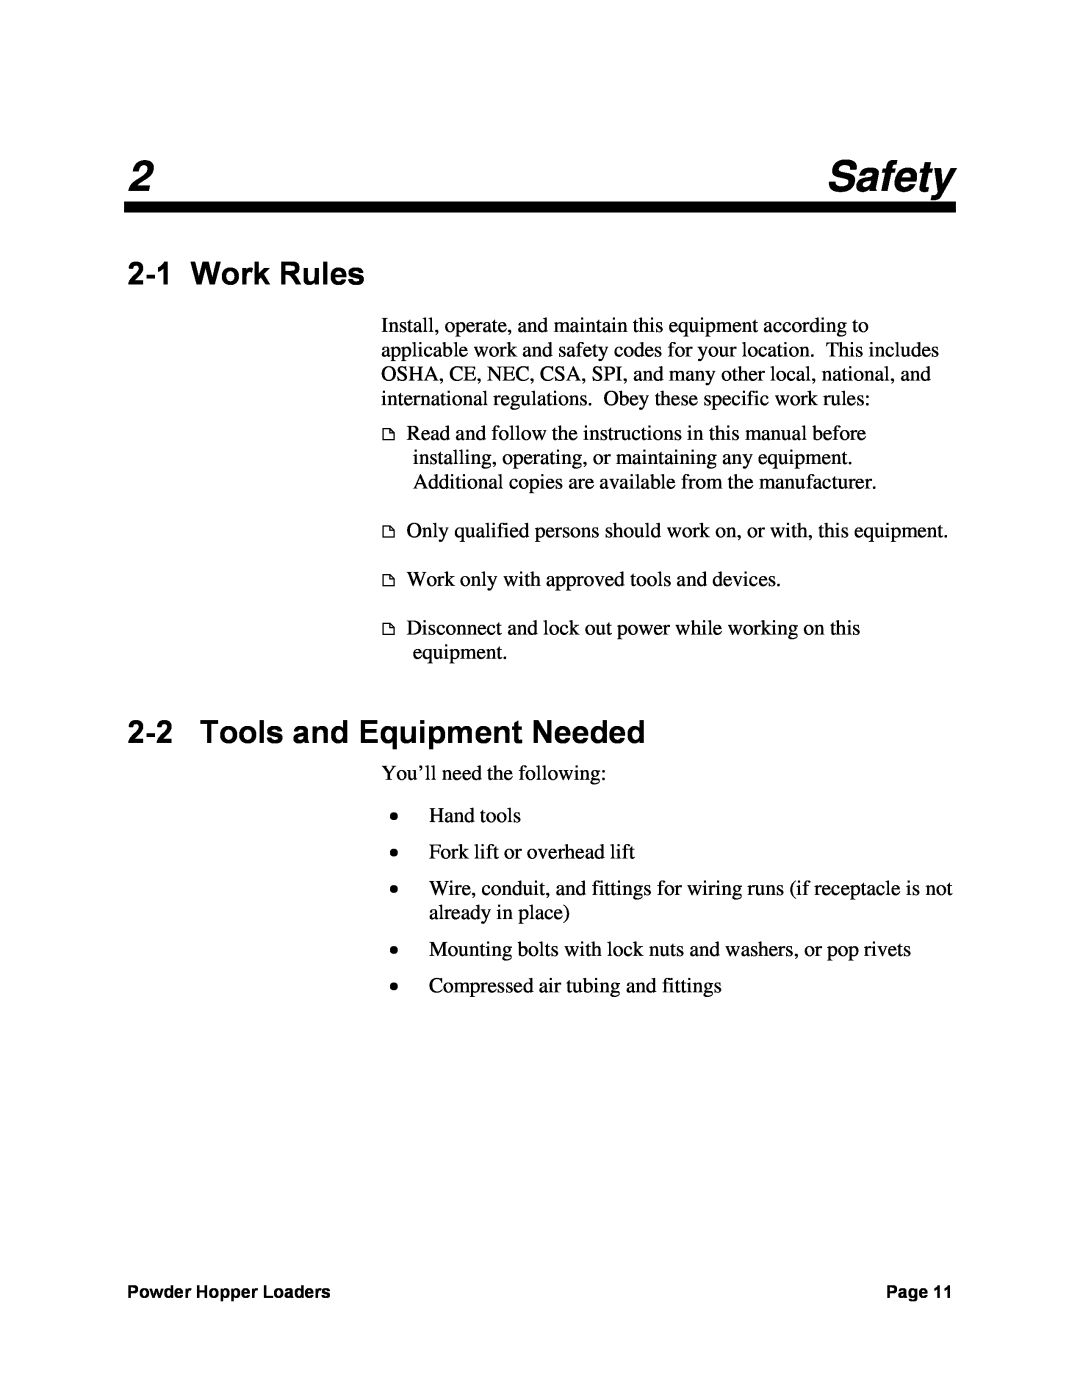 Sterling 238, 882, 0 manual Safety, Work Rules, Tools and Equipment Needed 